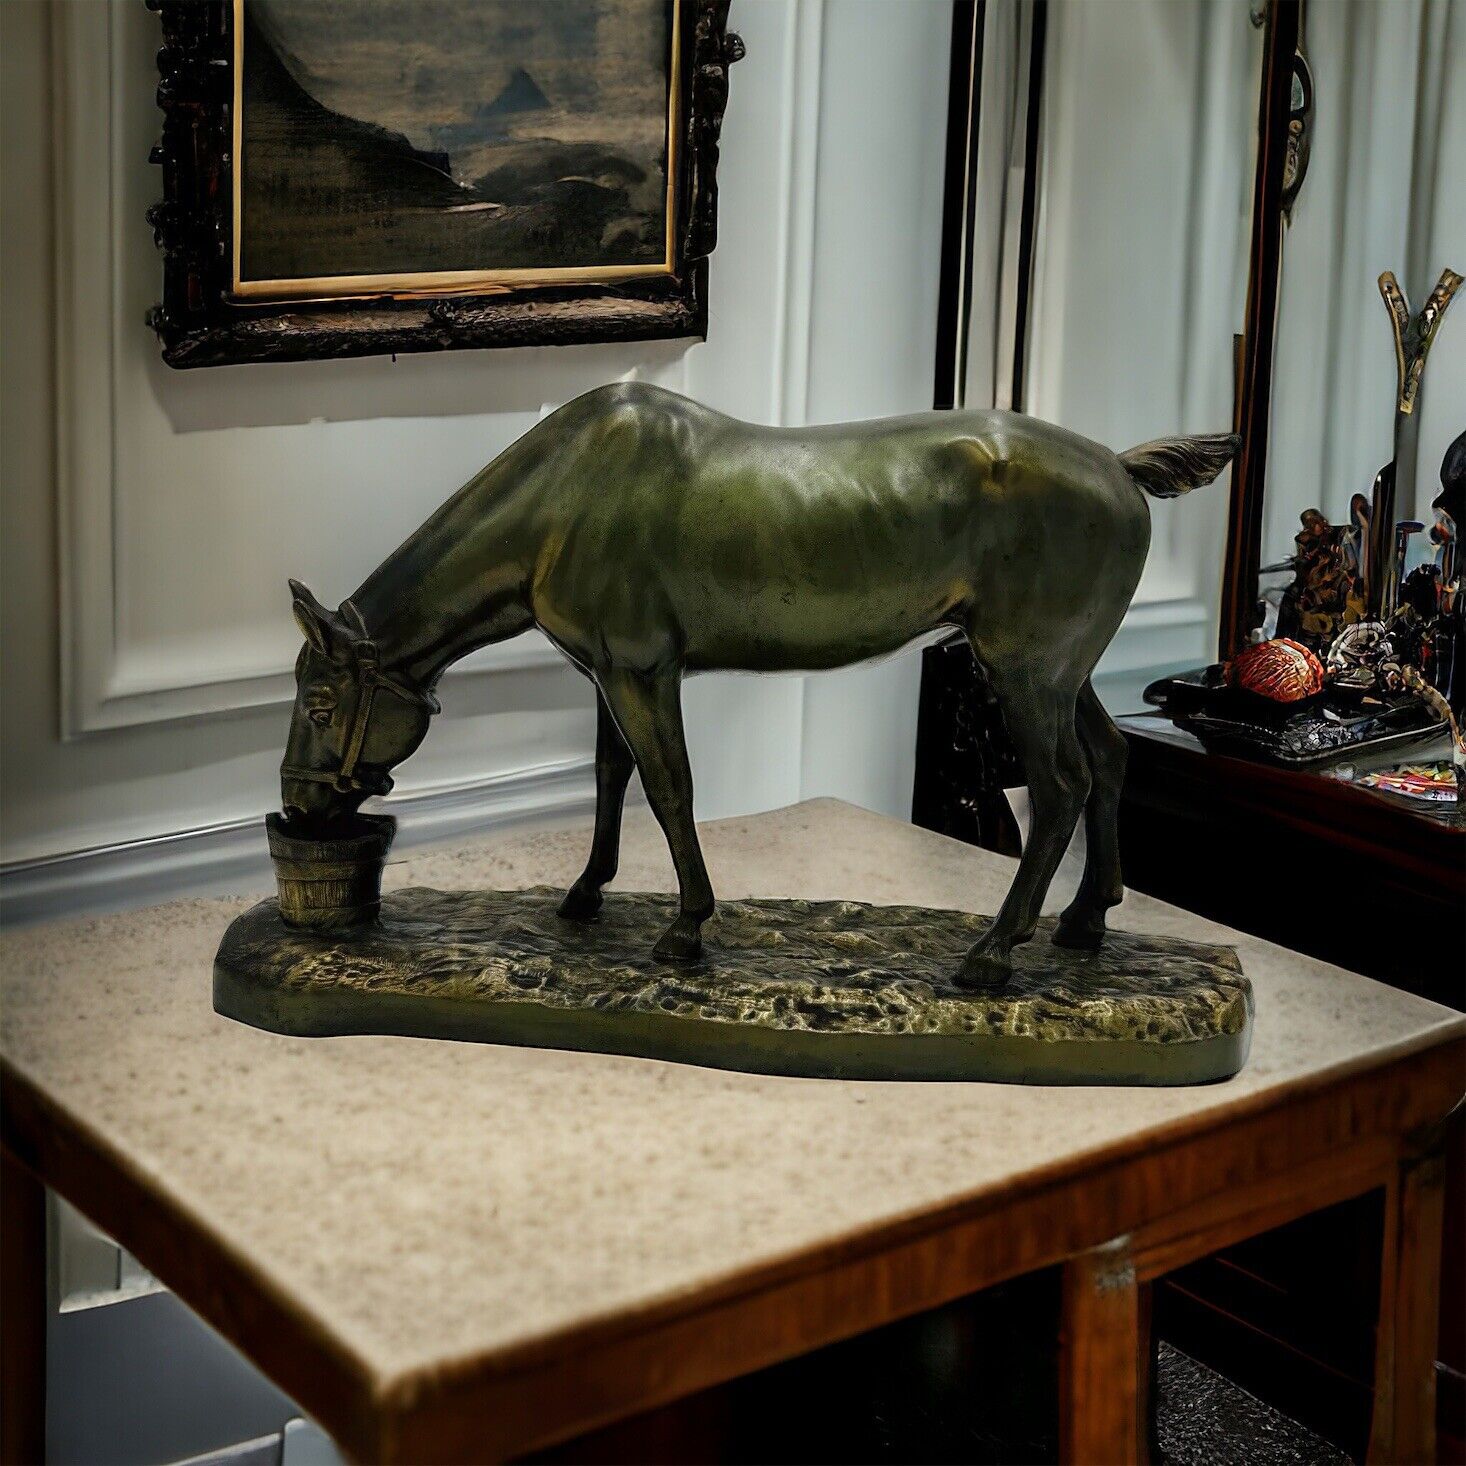 Bronze Horse Eating From Bucket Hollow Cast Sculpture 15in x 8in Vintage Decor